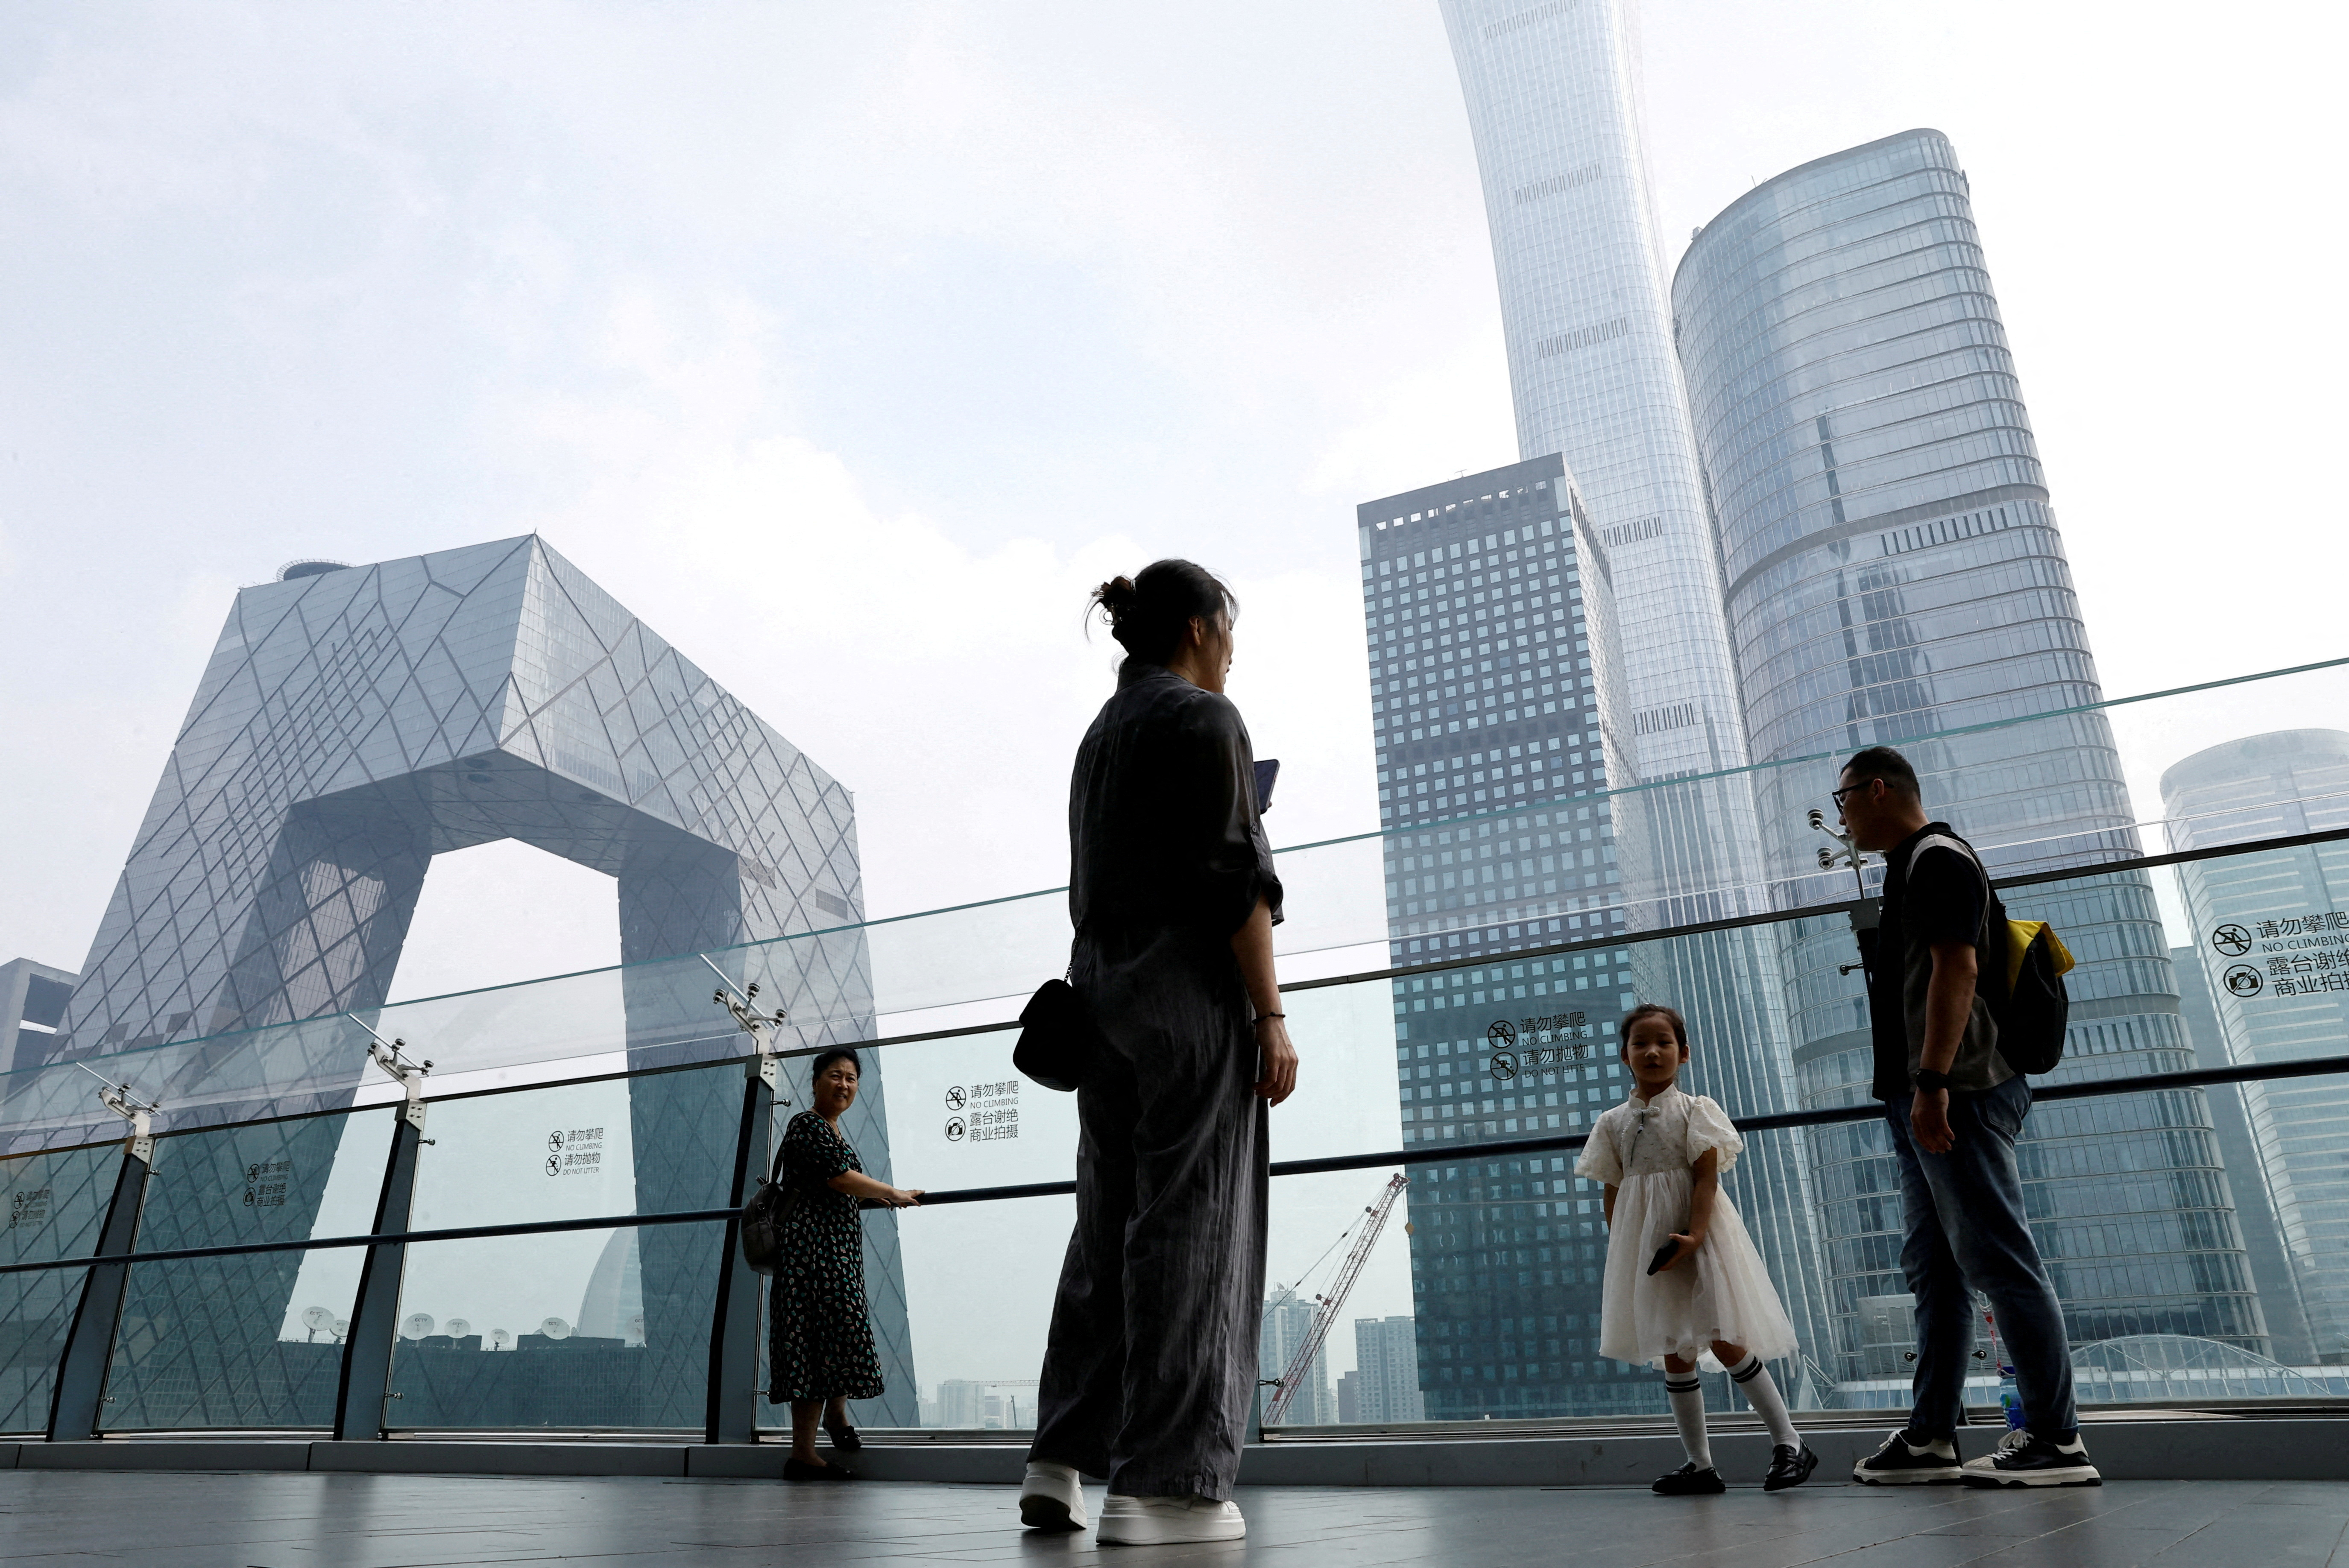 People stand at a shopping mall near the CCTV headquarters and China Zun skyscraper, in Beijing's central business district (CBD)